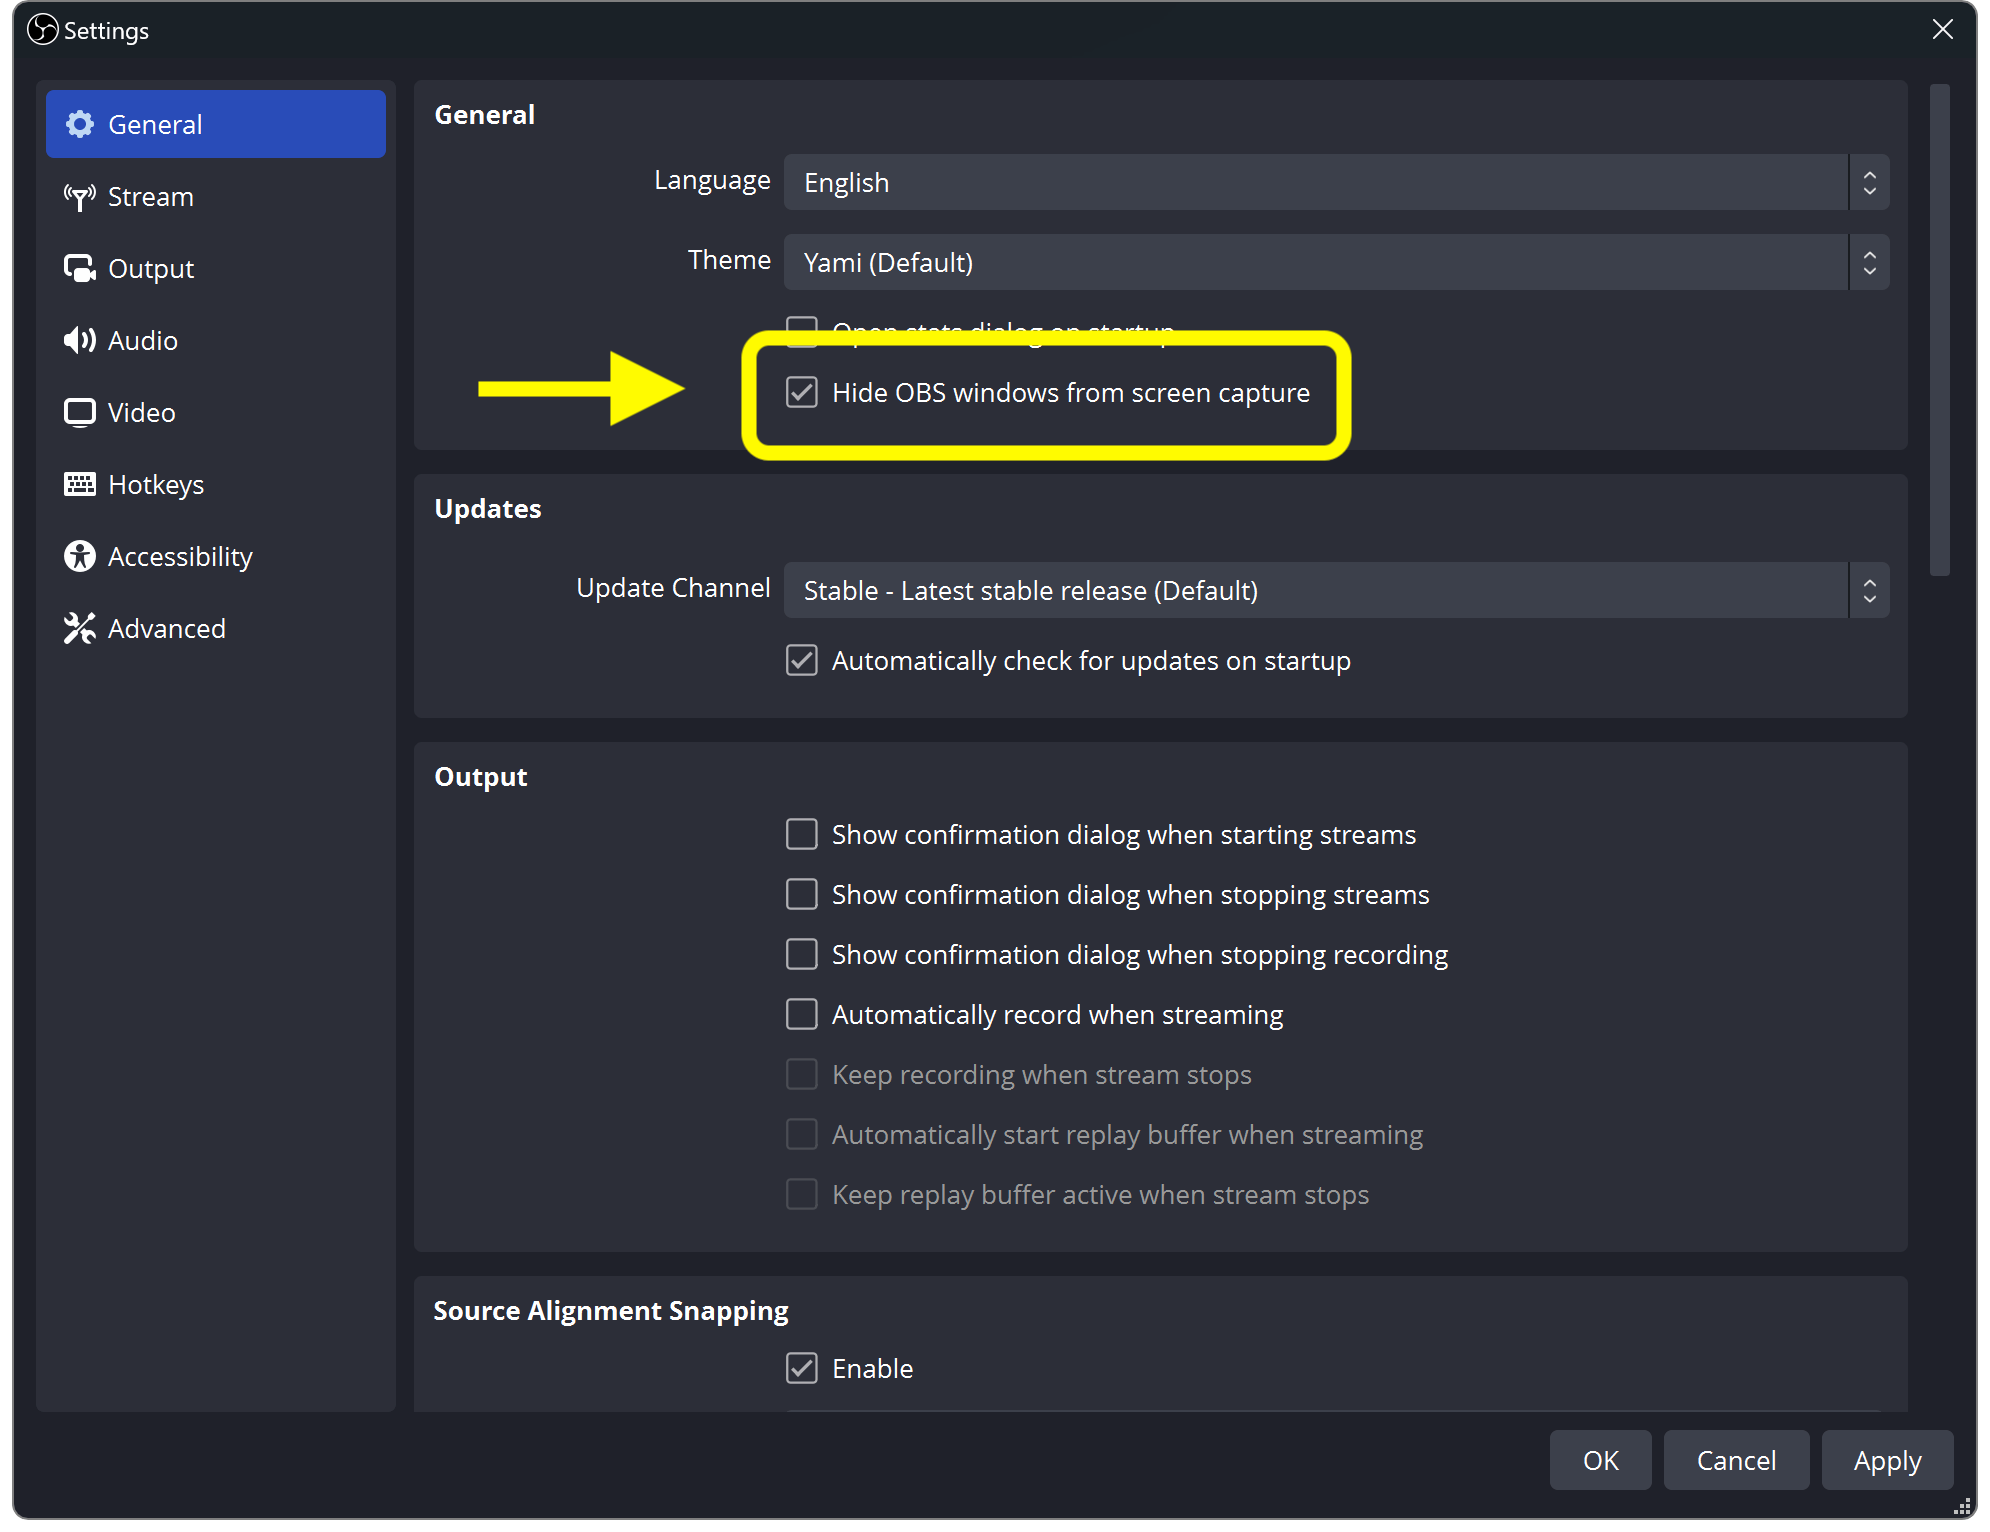 OBS Studio settings window with the "Hide OBS windows from screen capture" option highlighted